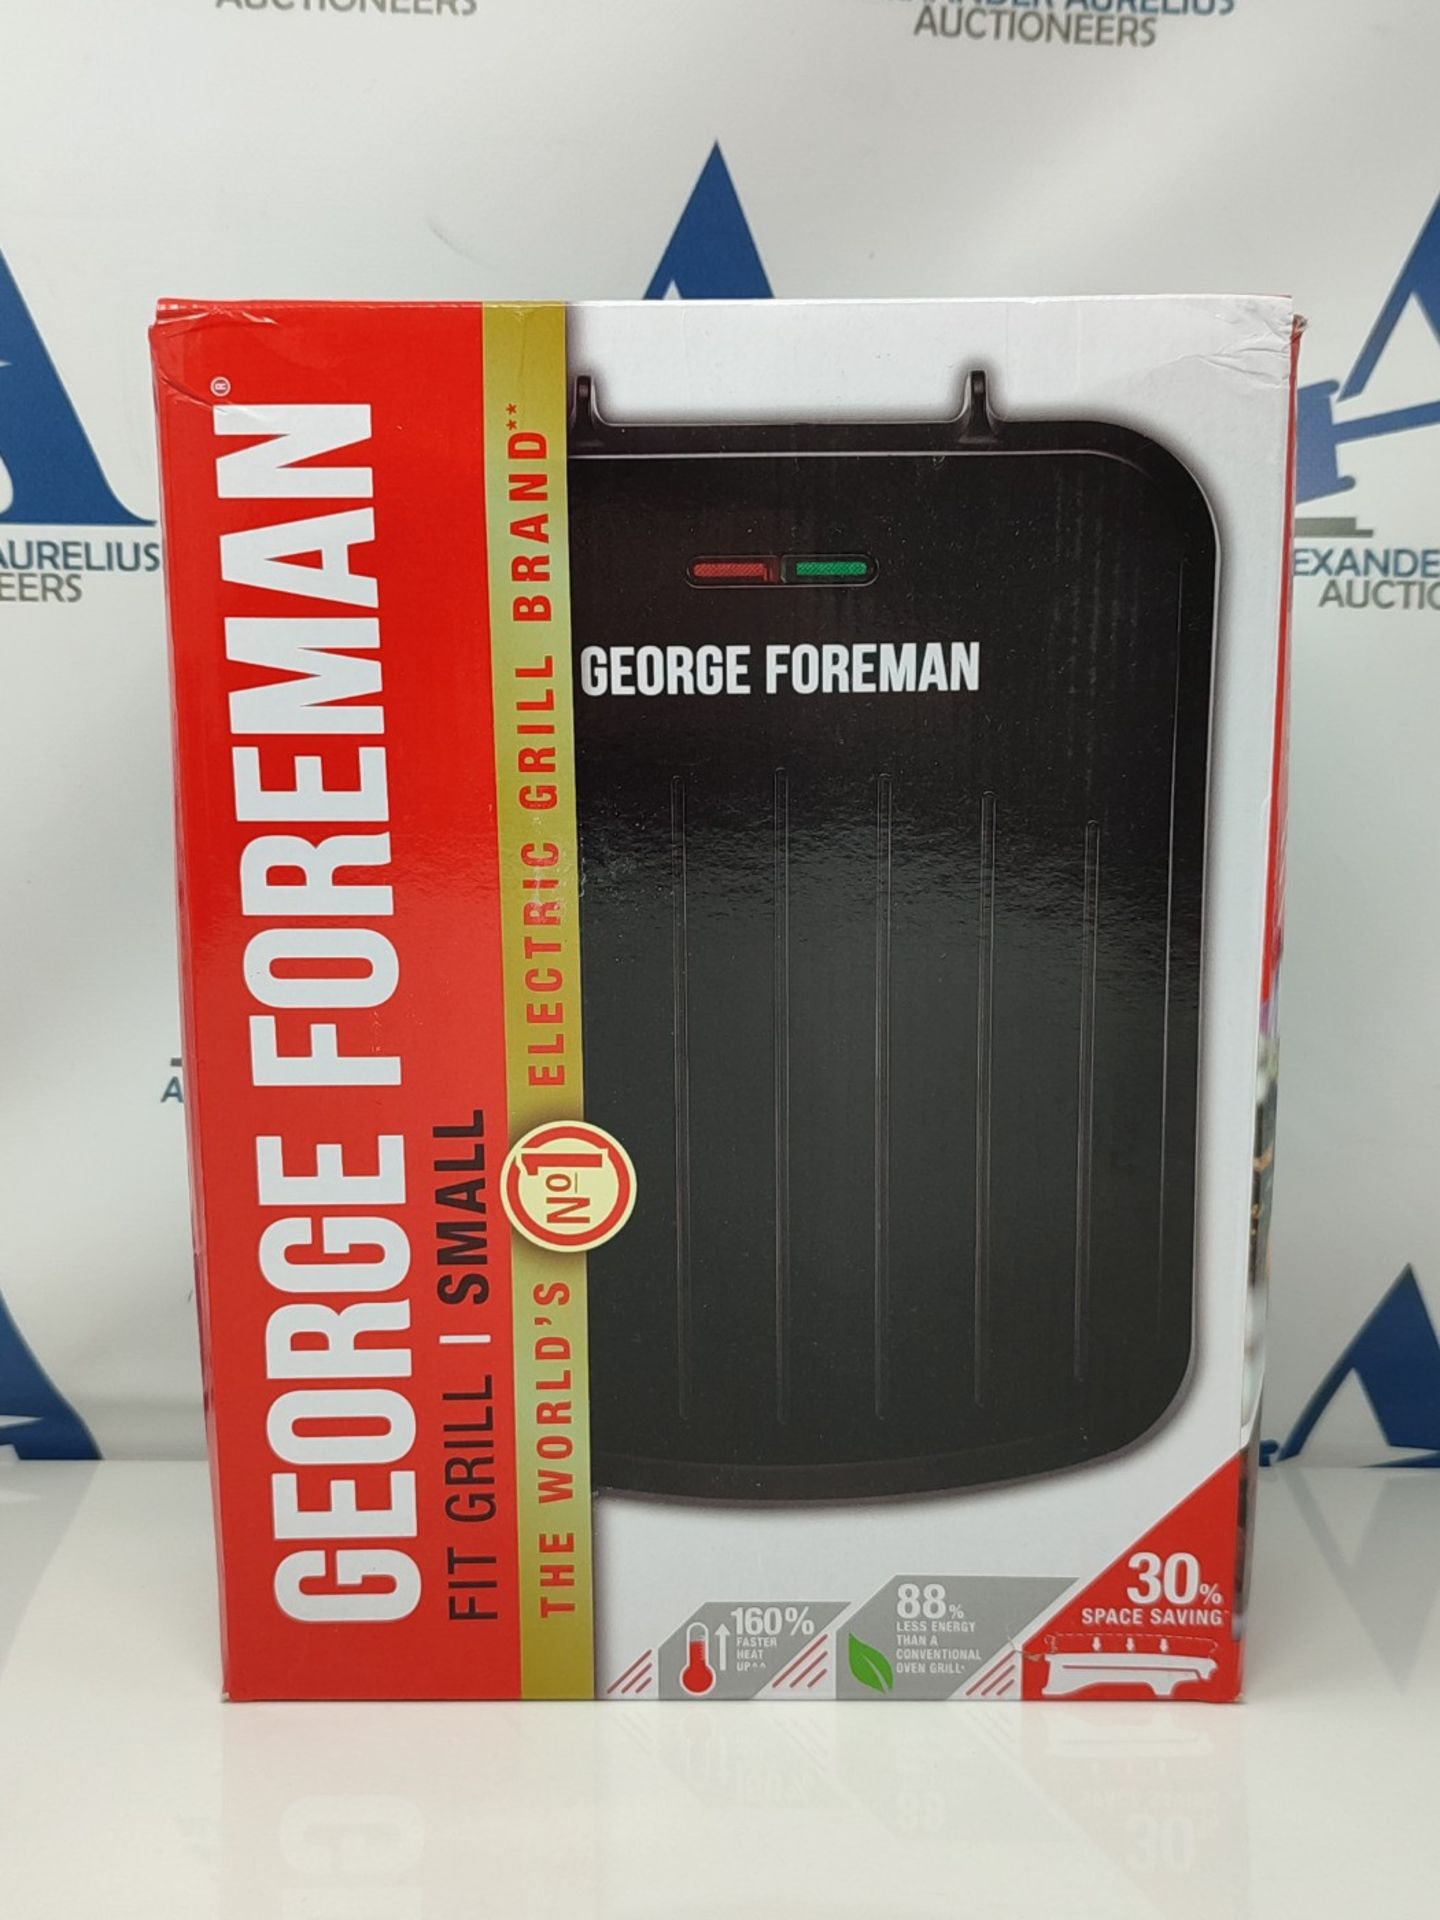 George Foreman 25800 Small Fit Grill - Versatile Griddle, Hot Plate and Toastie Machin - Image 2 of 3